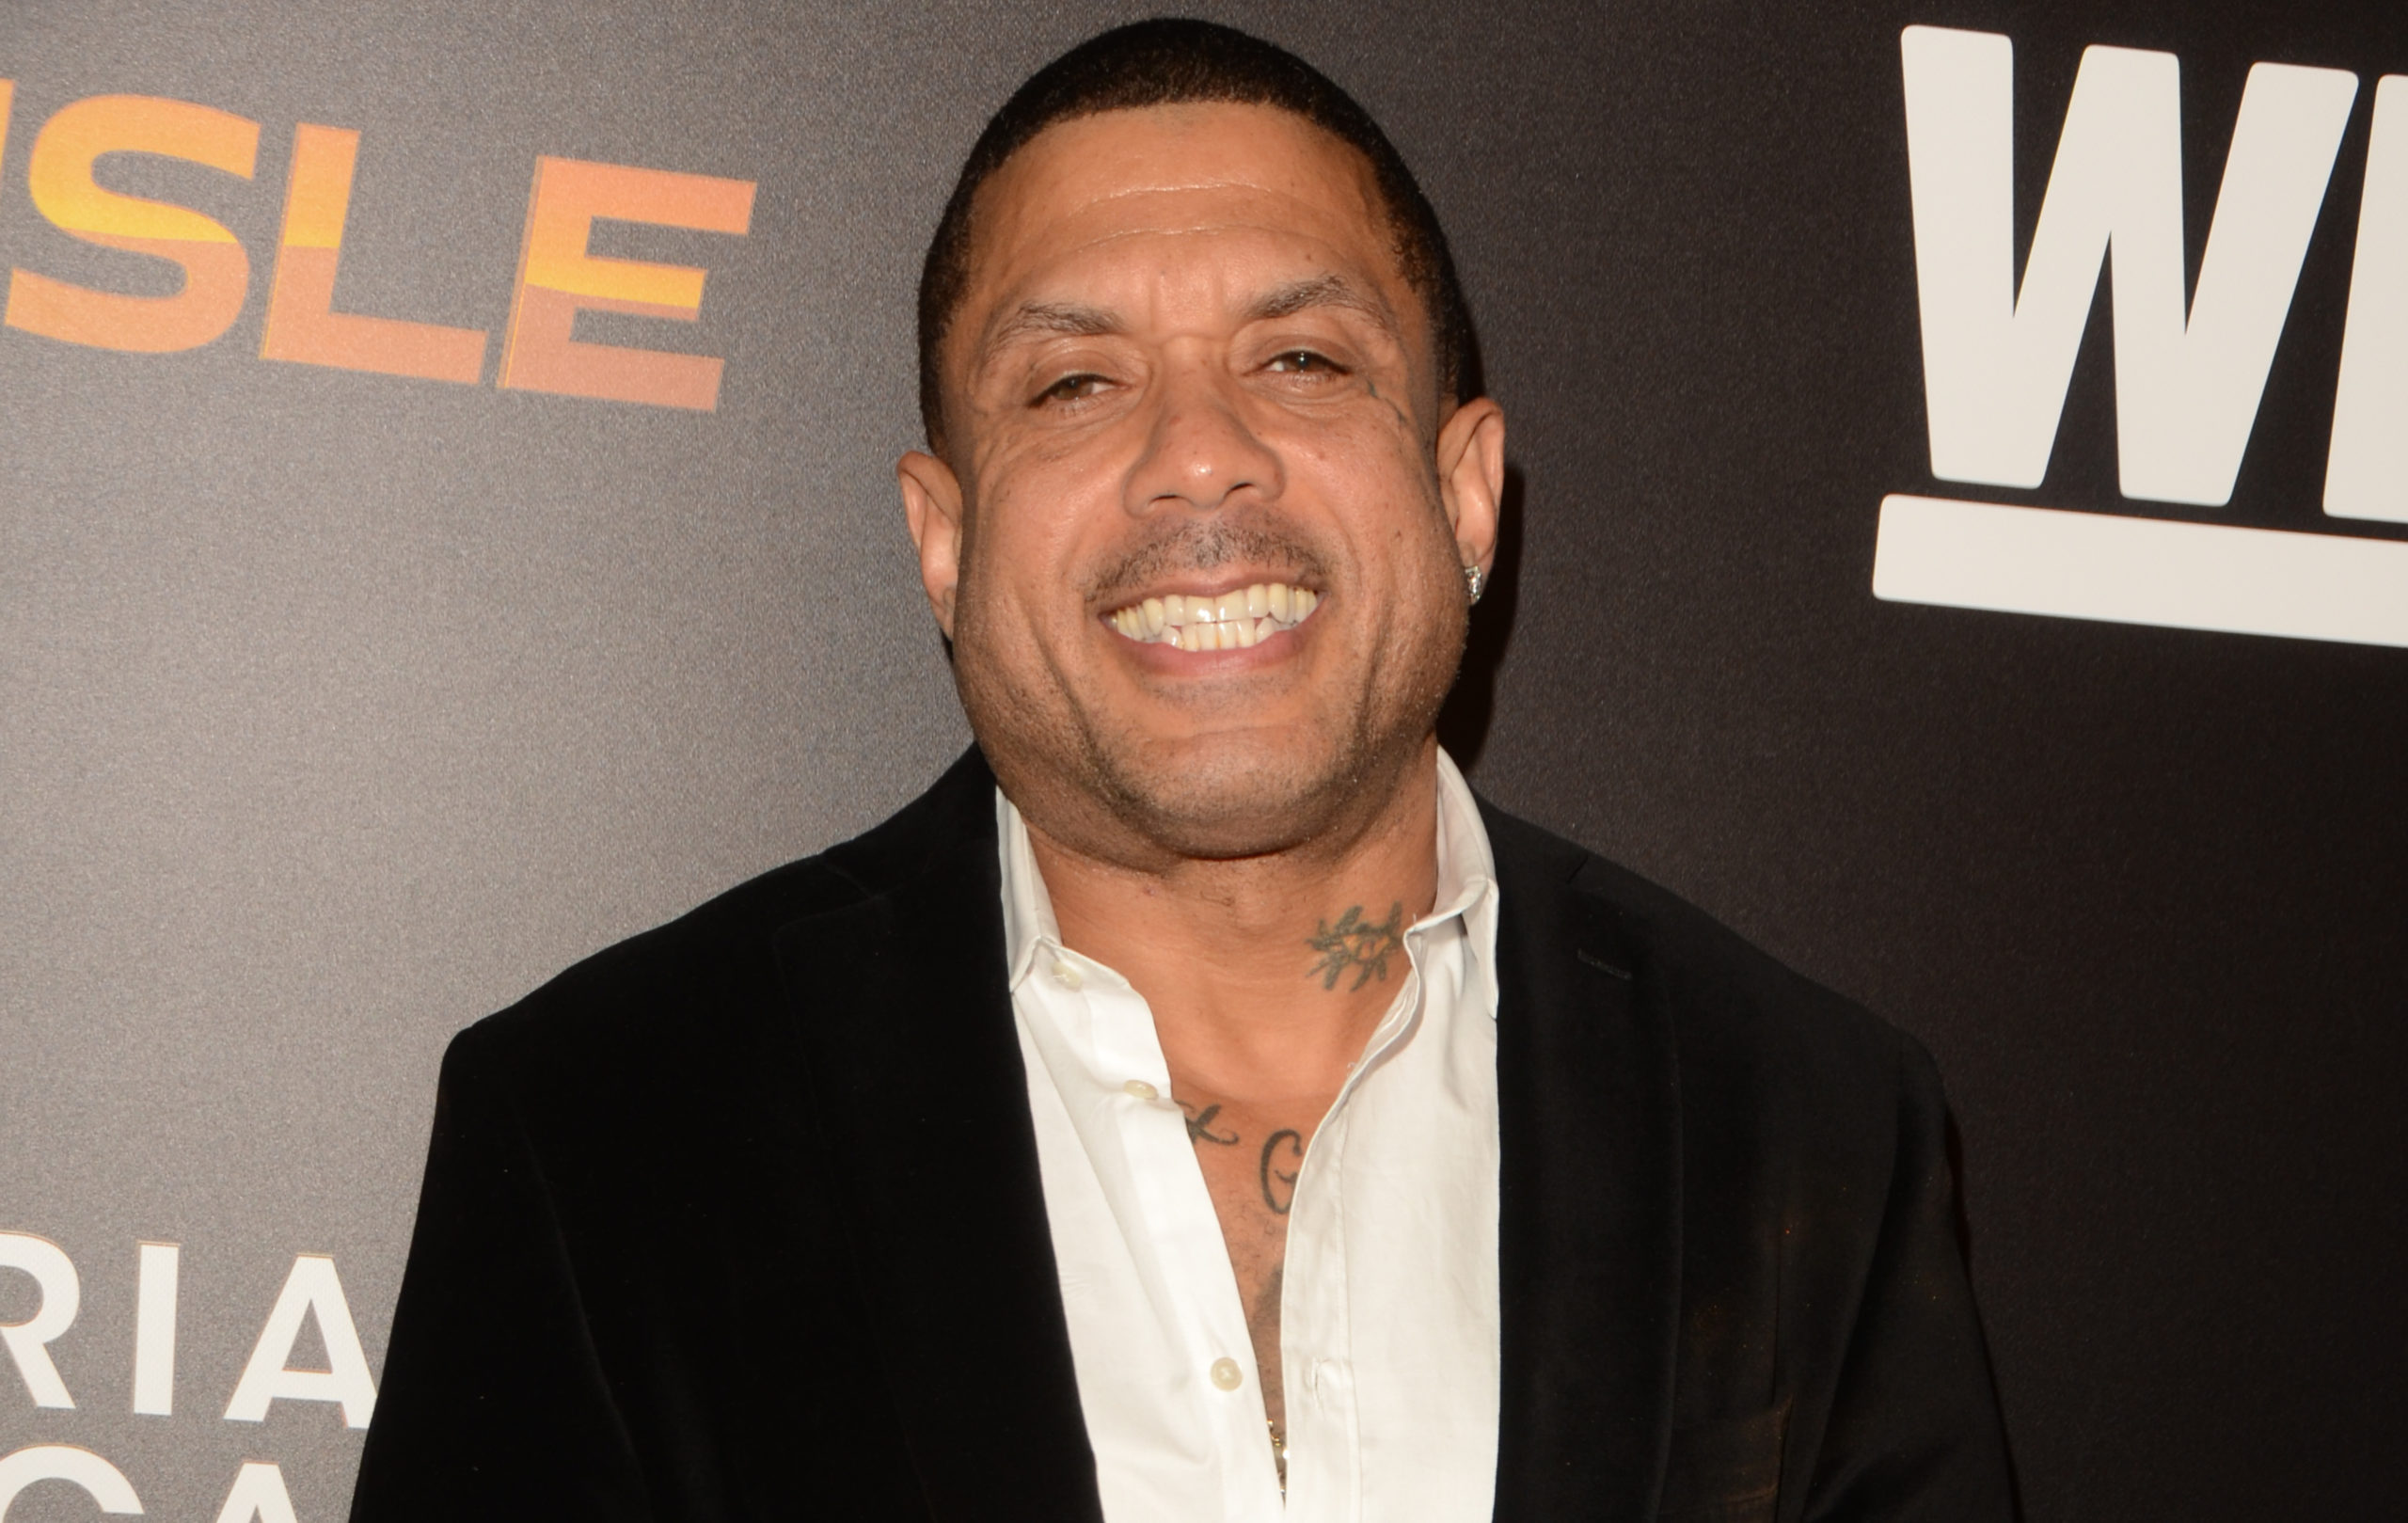 LOS ANGELES - NOV 19 Benzino at the Premieres Of Marriage Boot Camp Reality Stars and Ex-isle at the Le Jardin on November 19, 2015 in Los Angeles, CA